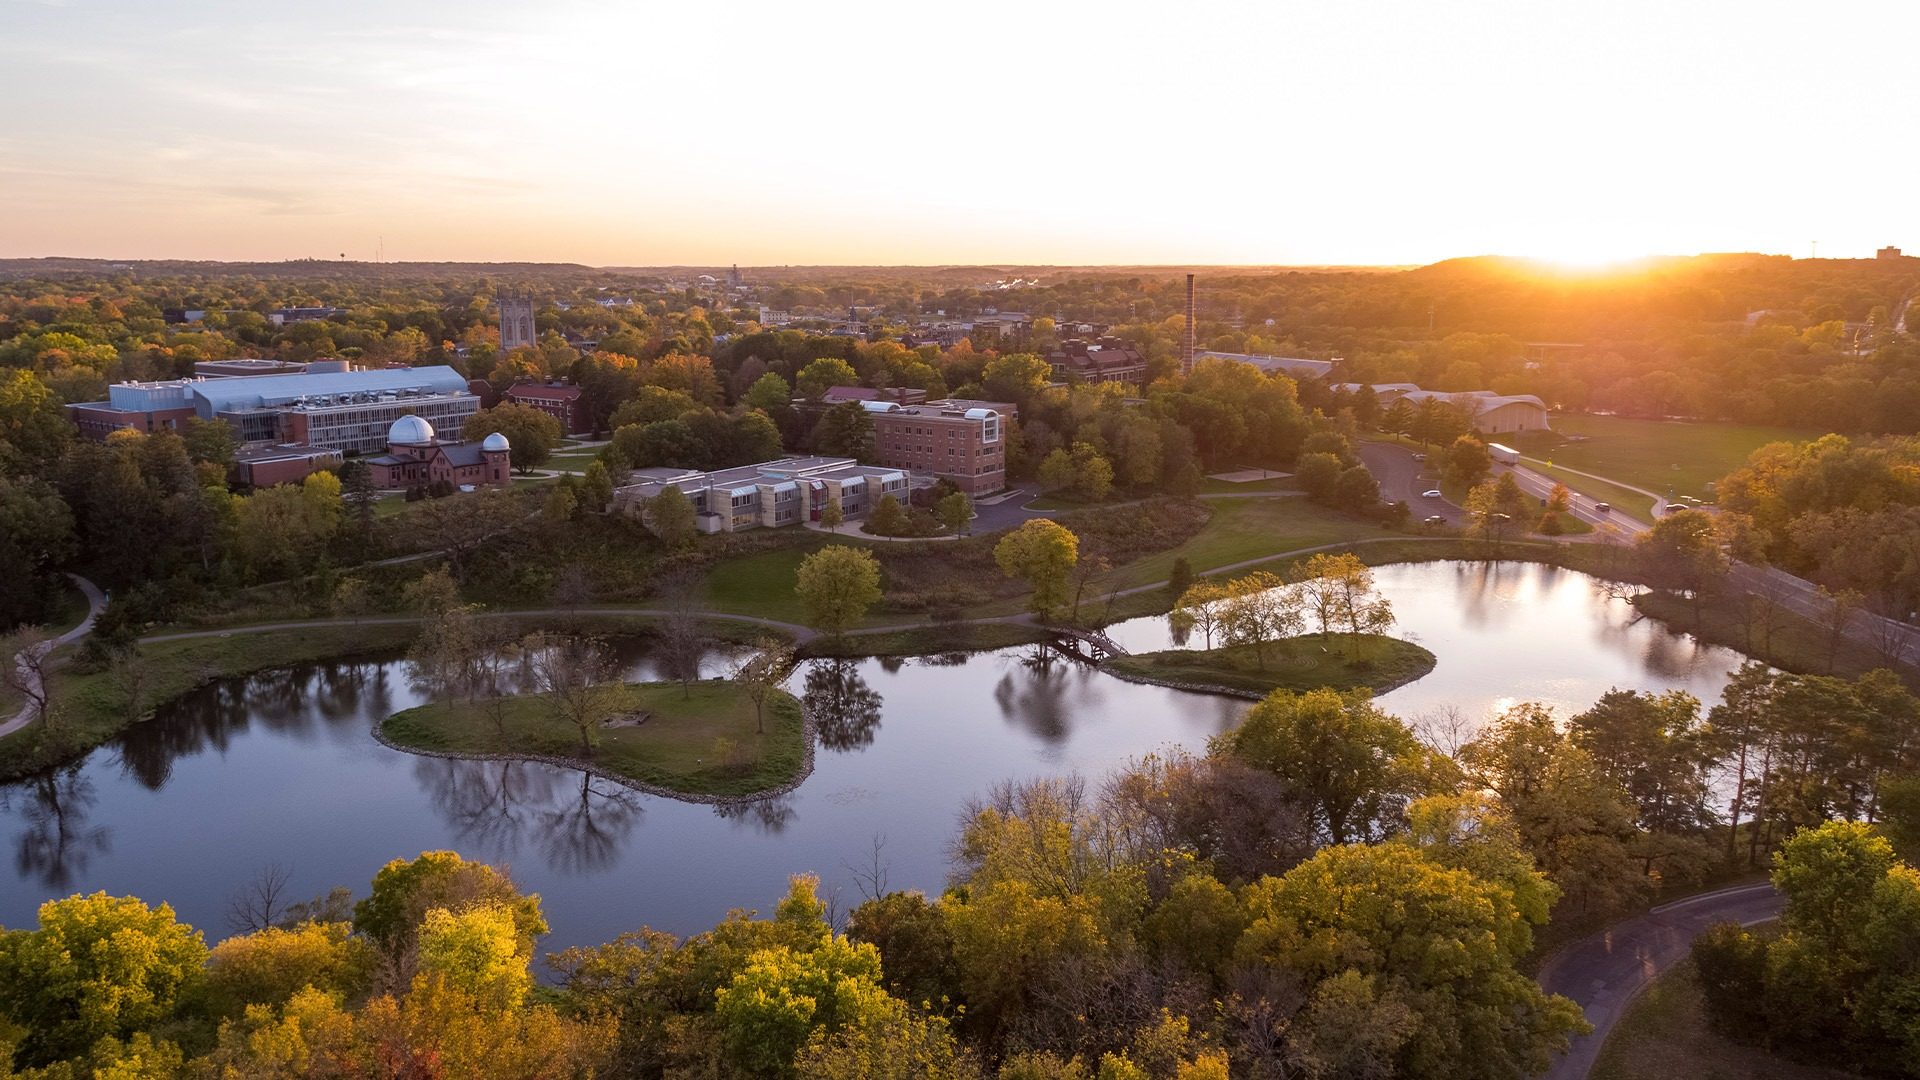 Overview of Lyman Lakes and Campus